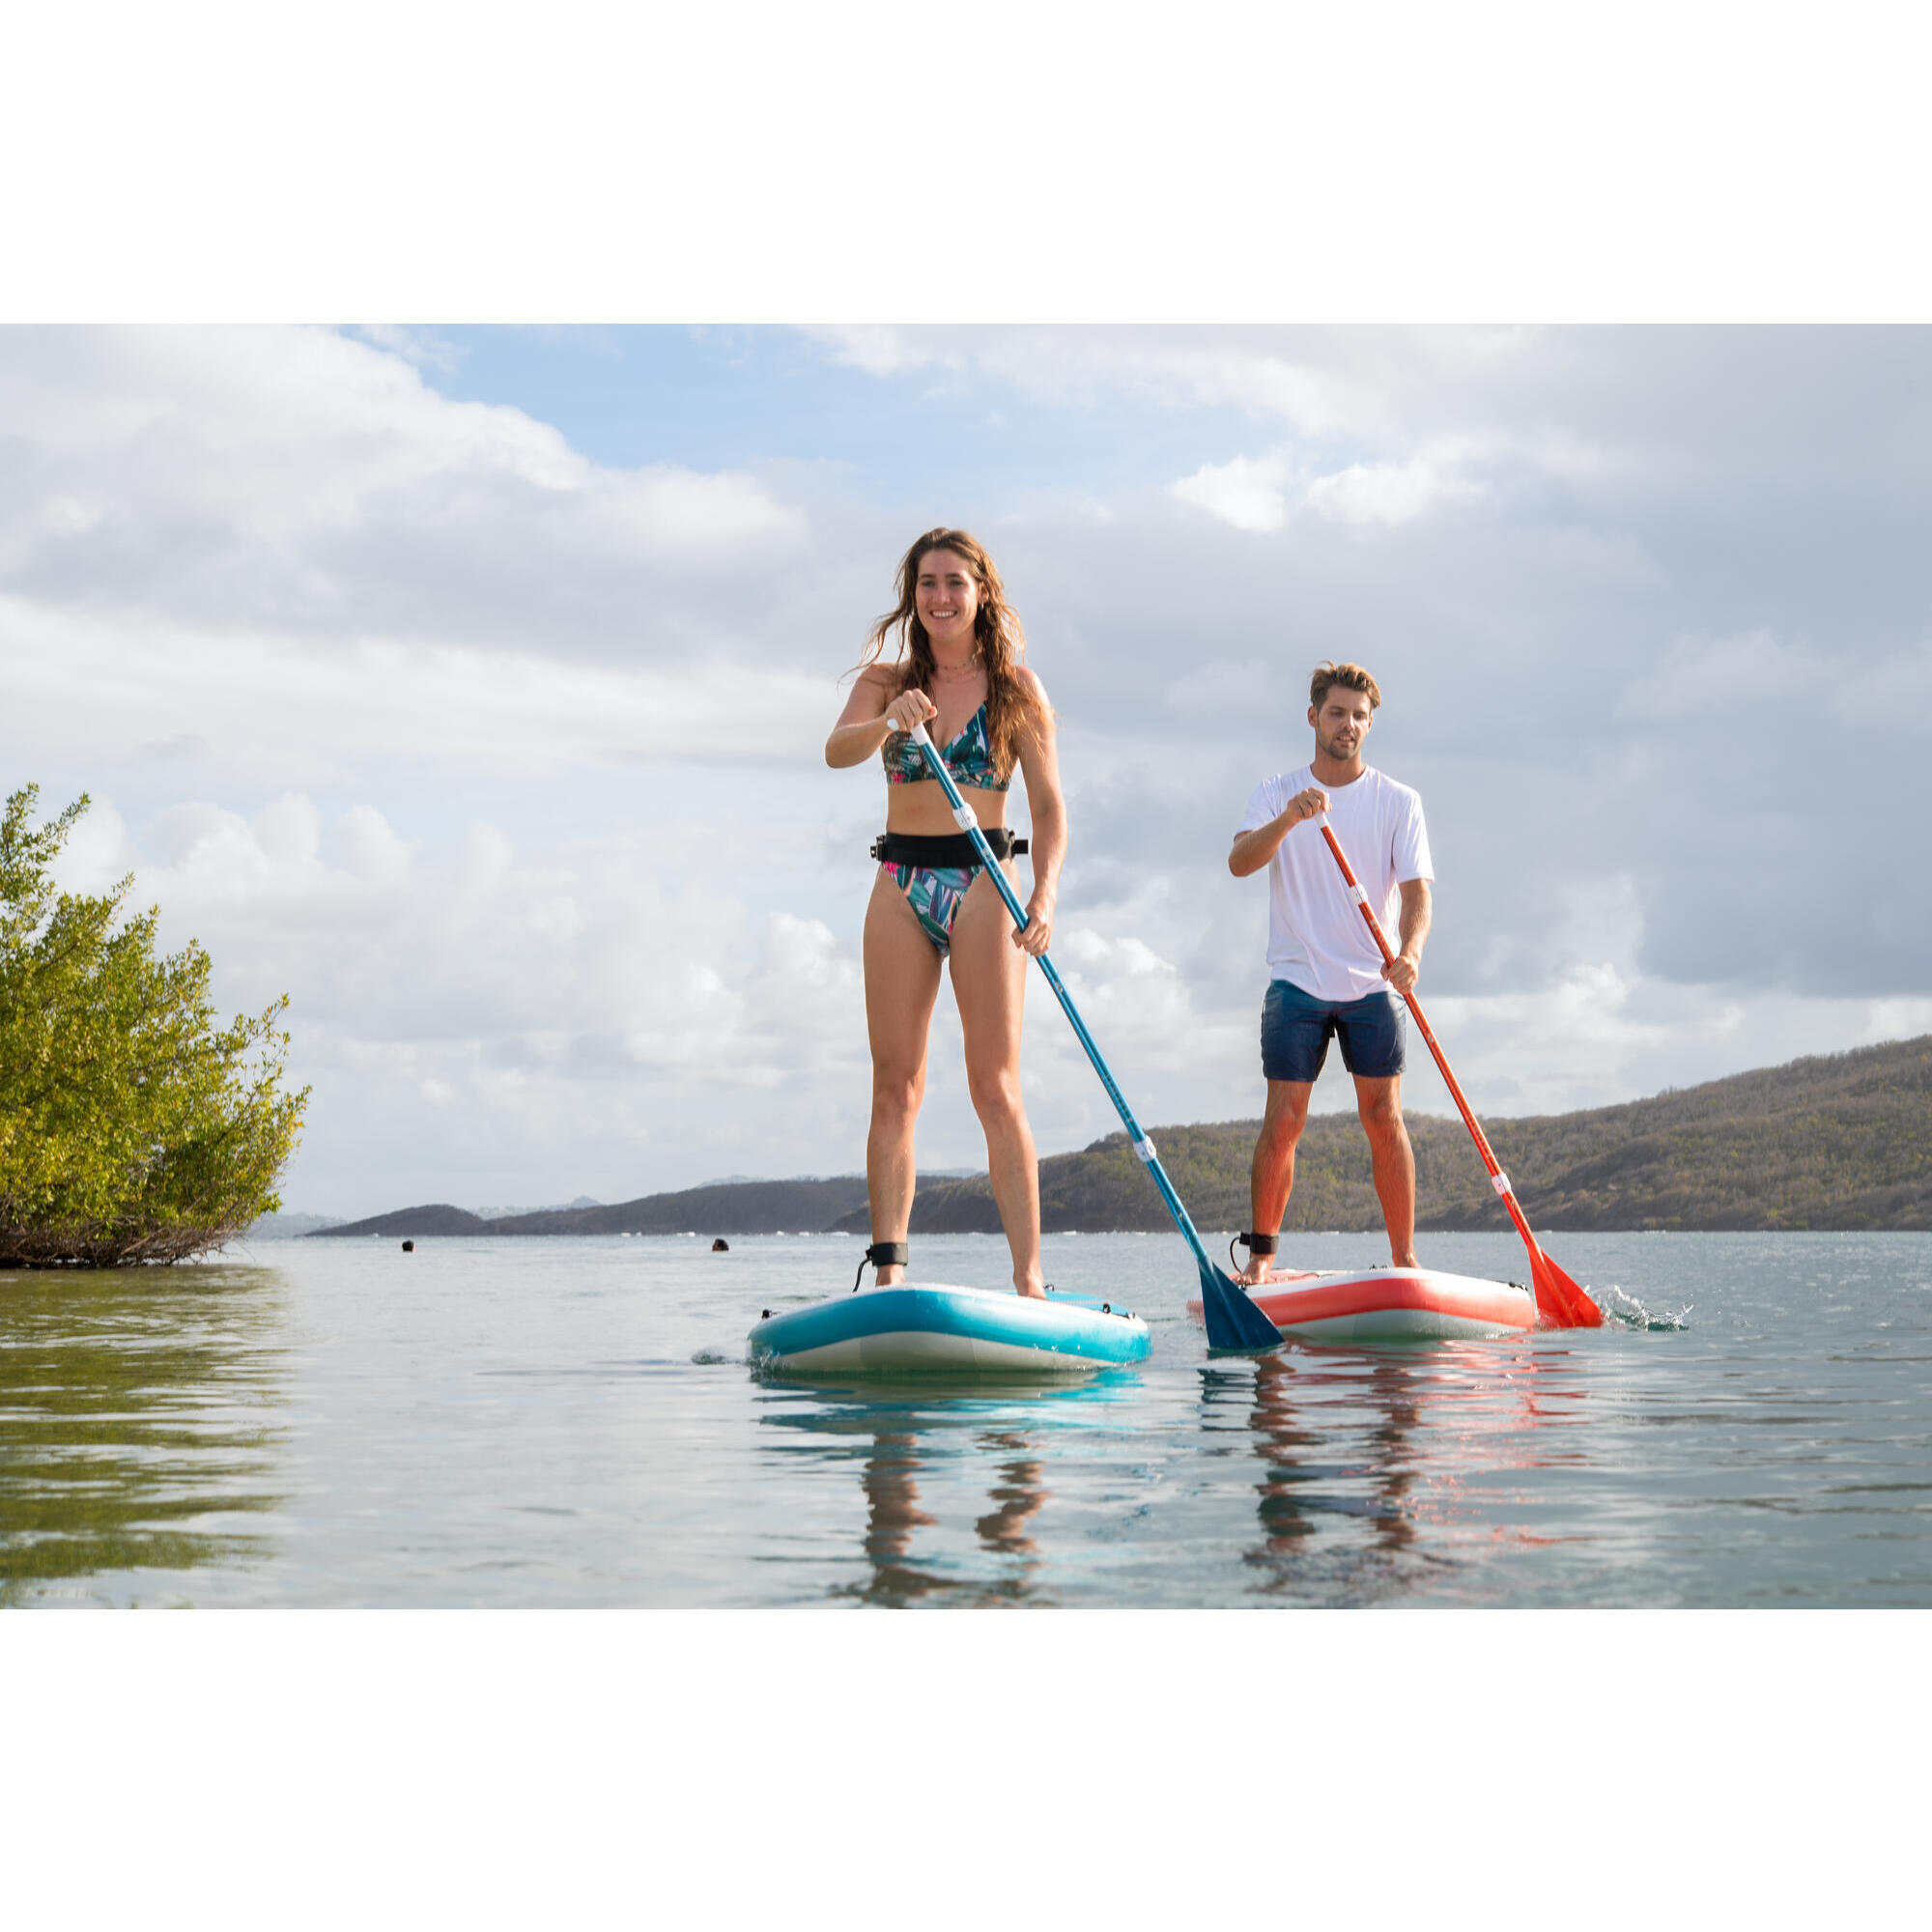 100 COMPACT 9FT (M) INFLATABLE STAND-UP PADDLEBOARD - WHITE AND GREEN (80kg) 2/29